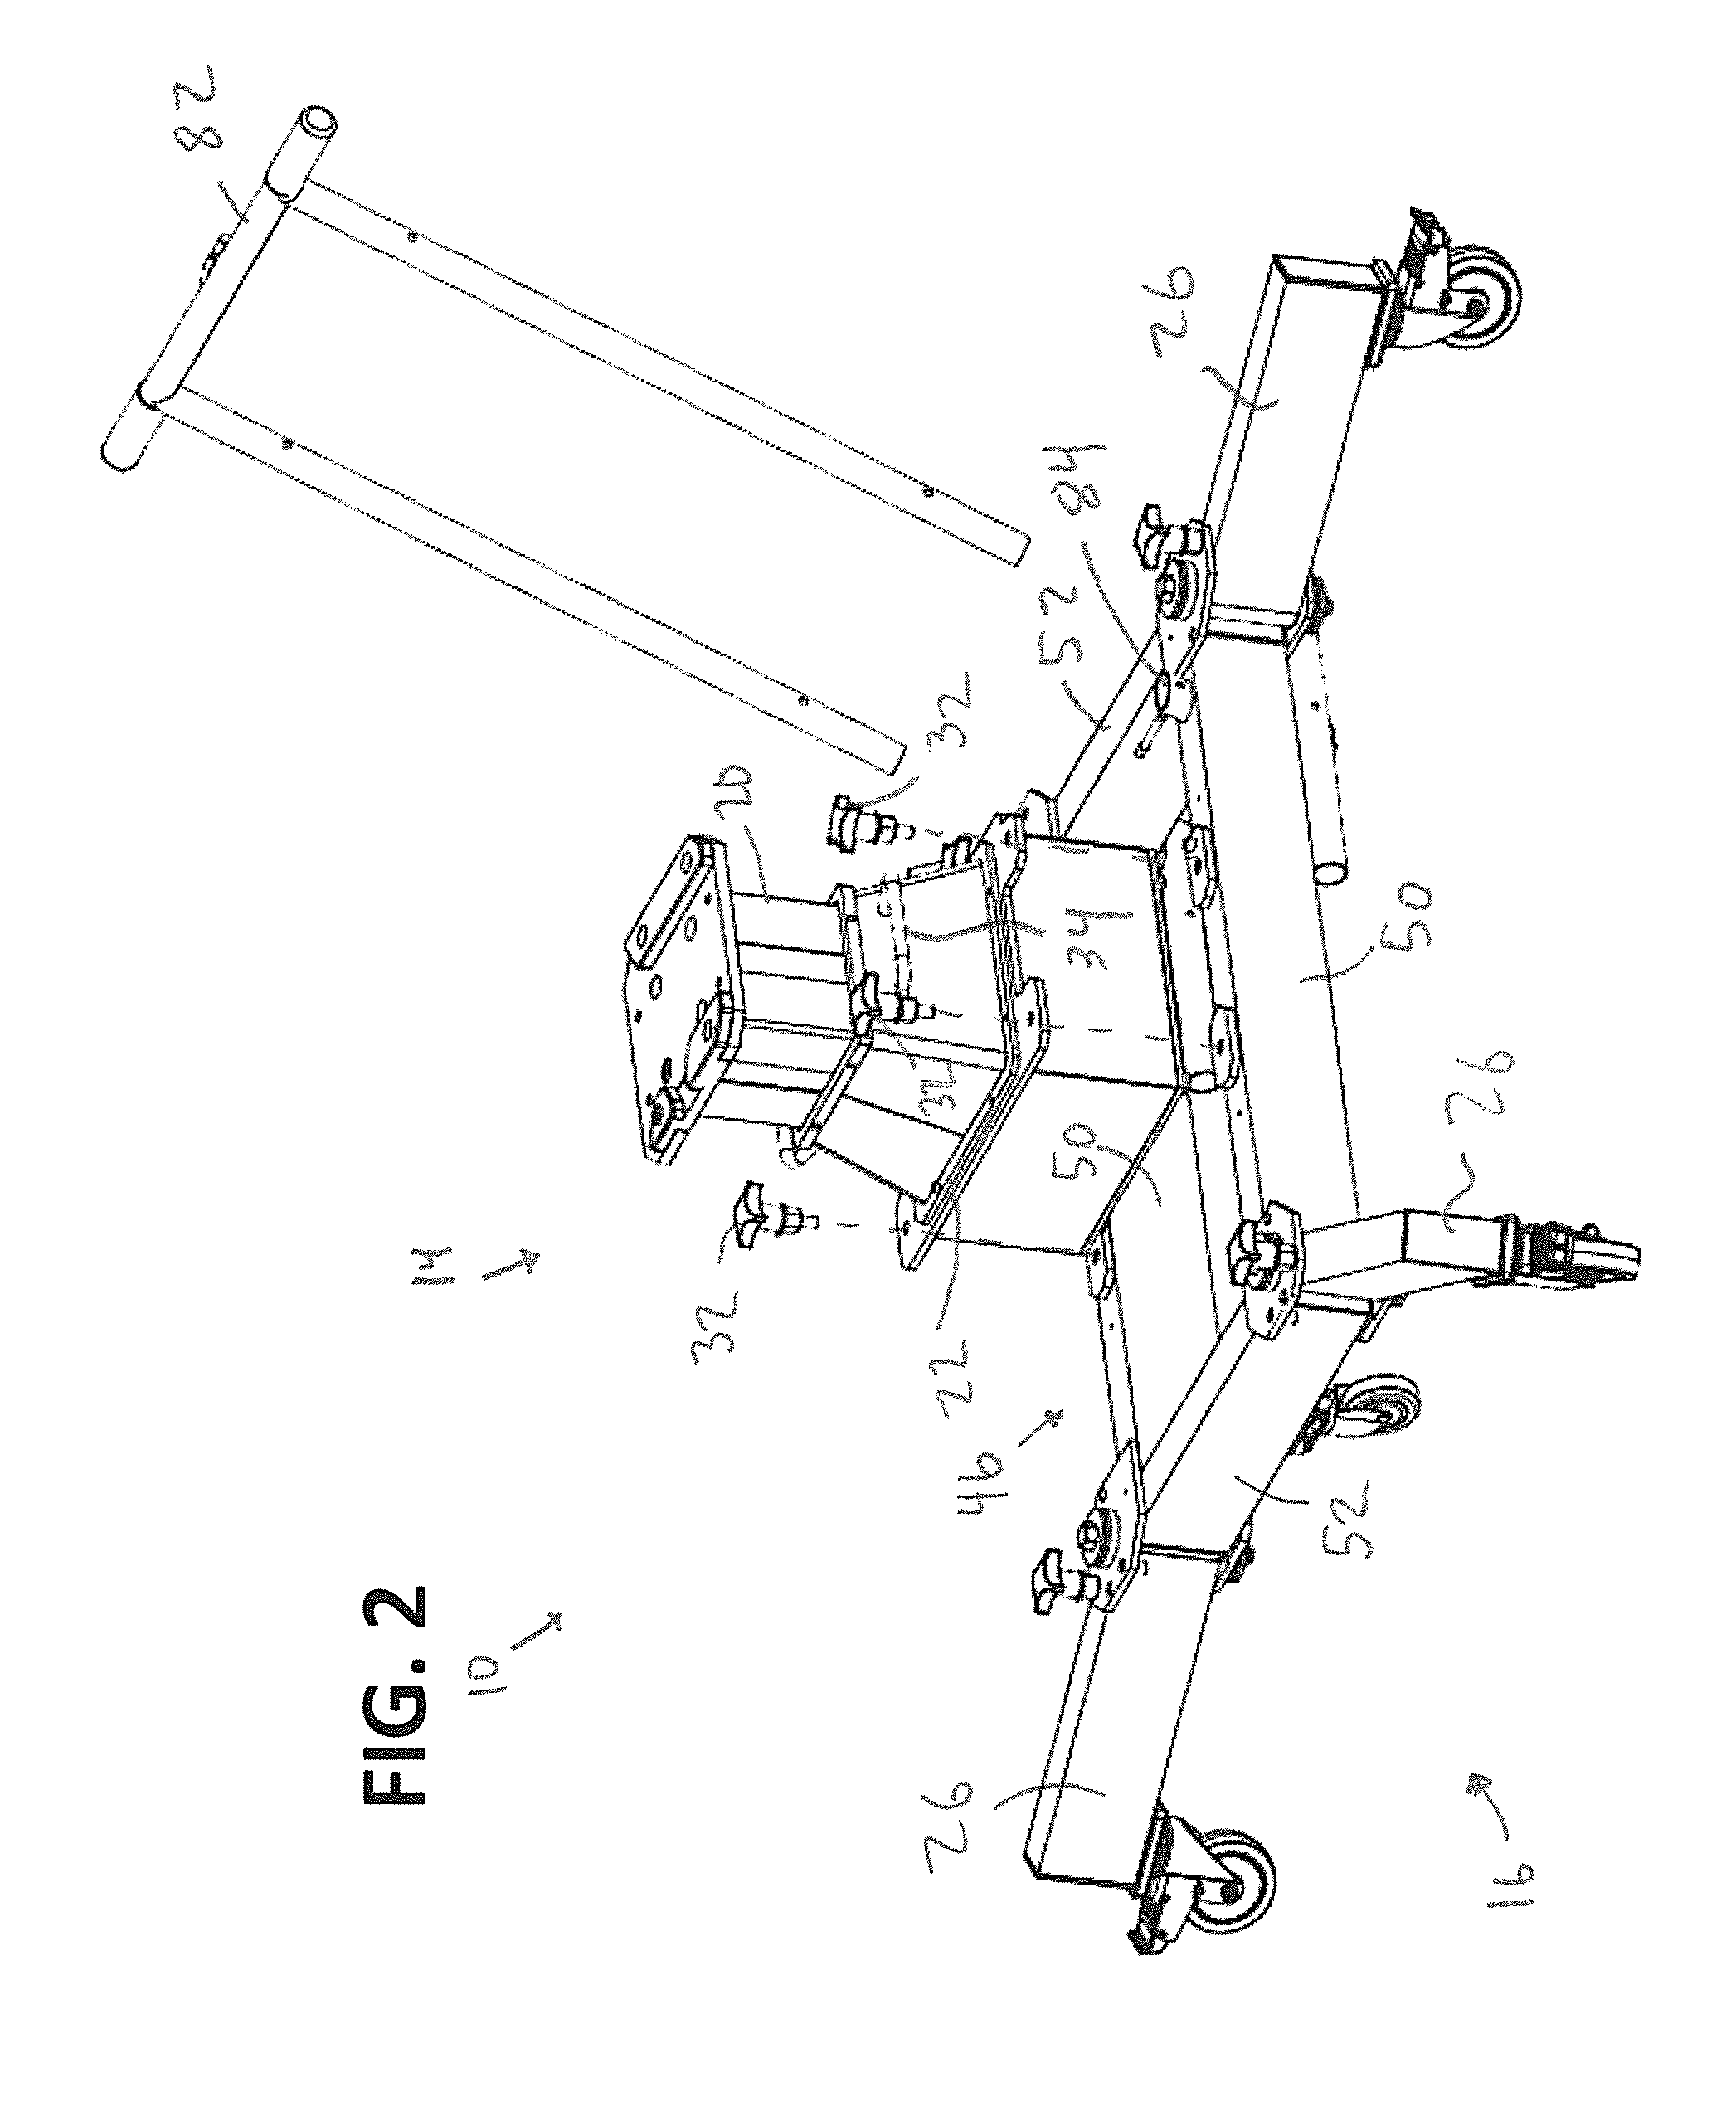 Support apparatus for radiotherapy measurement system